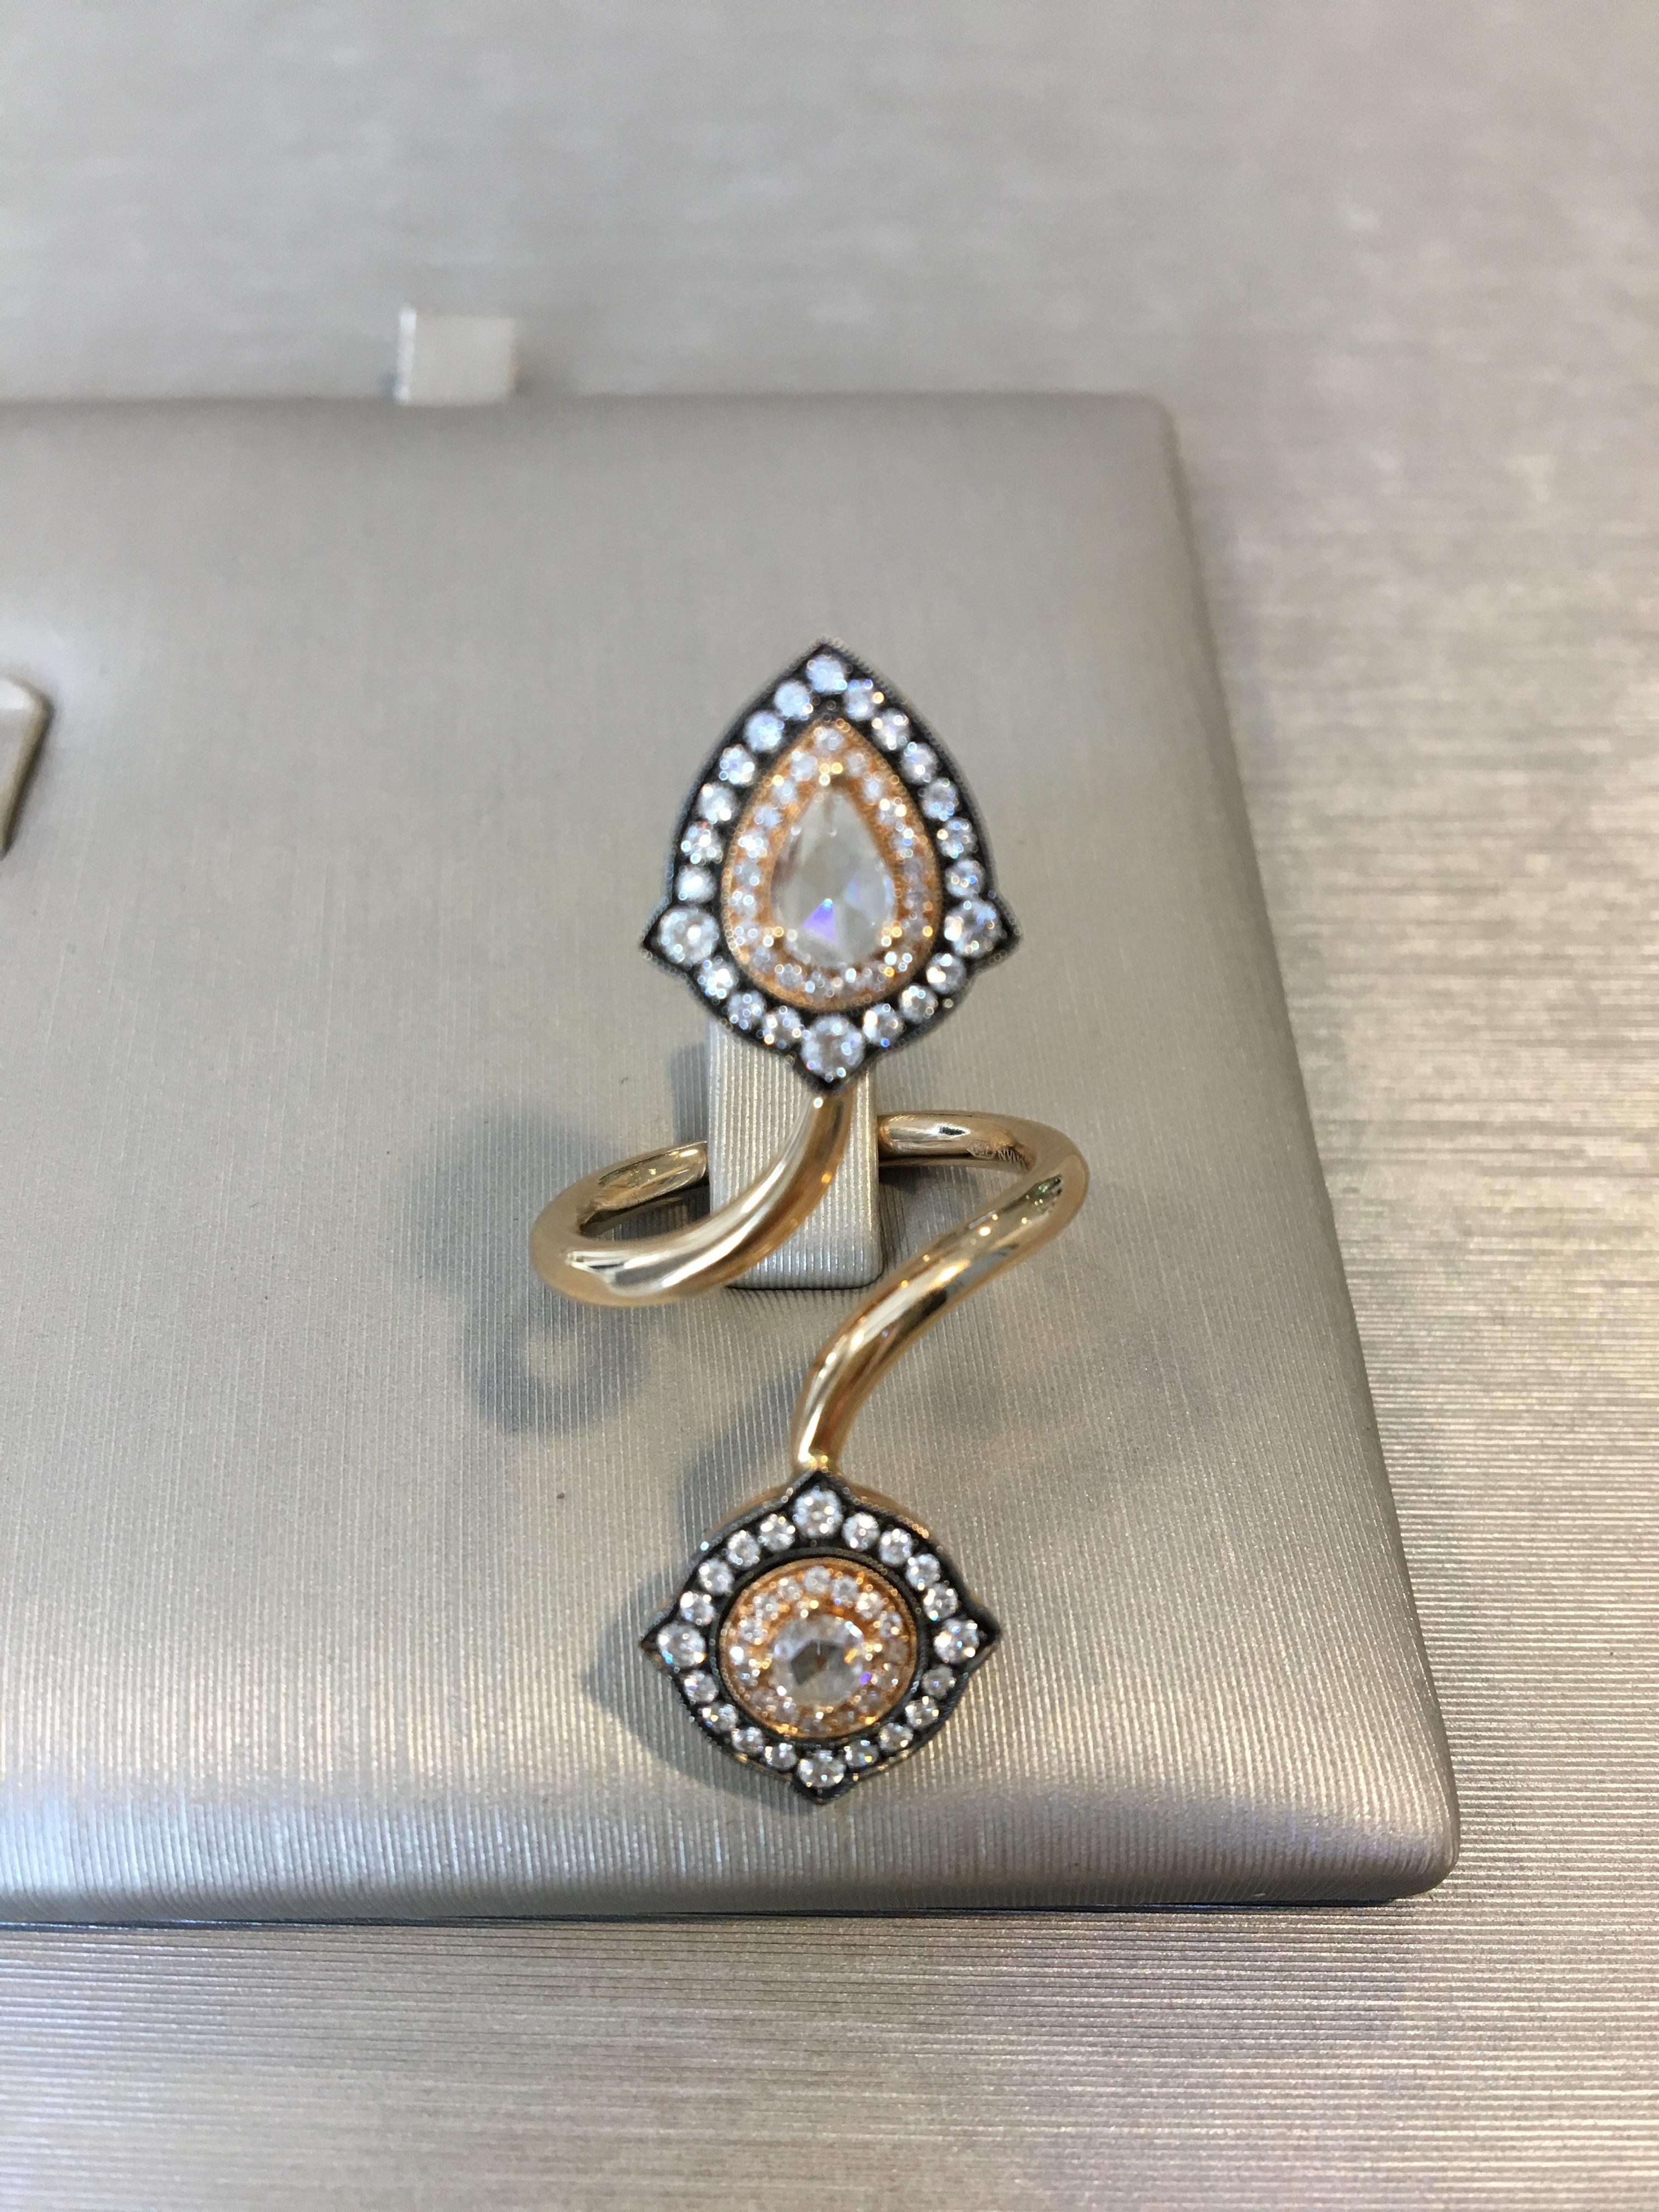 18 Karat Rose Gold 'Princesses Ring' from Once Upon a Time Collection created by Monan with 0.23 carats of rose cut diamonds: 0.15 carats of pear-shaped rose cut diamonds, 0.08 carats round rose cut diamond and 82 brilliant cut diamonds with the